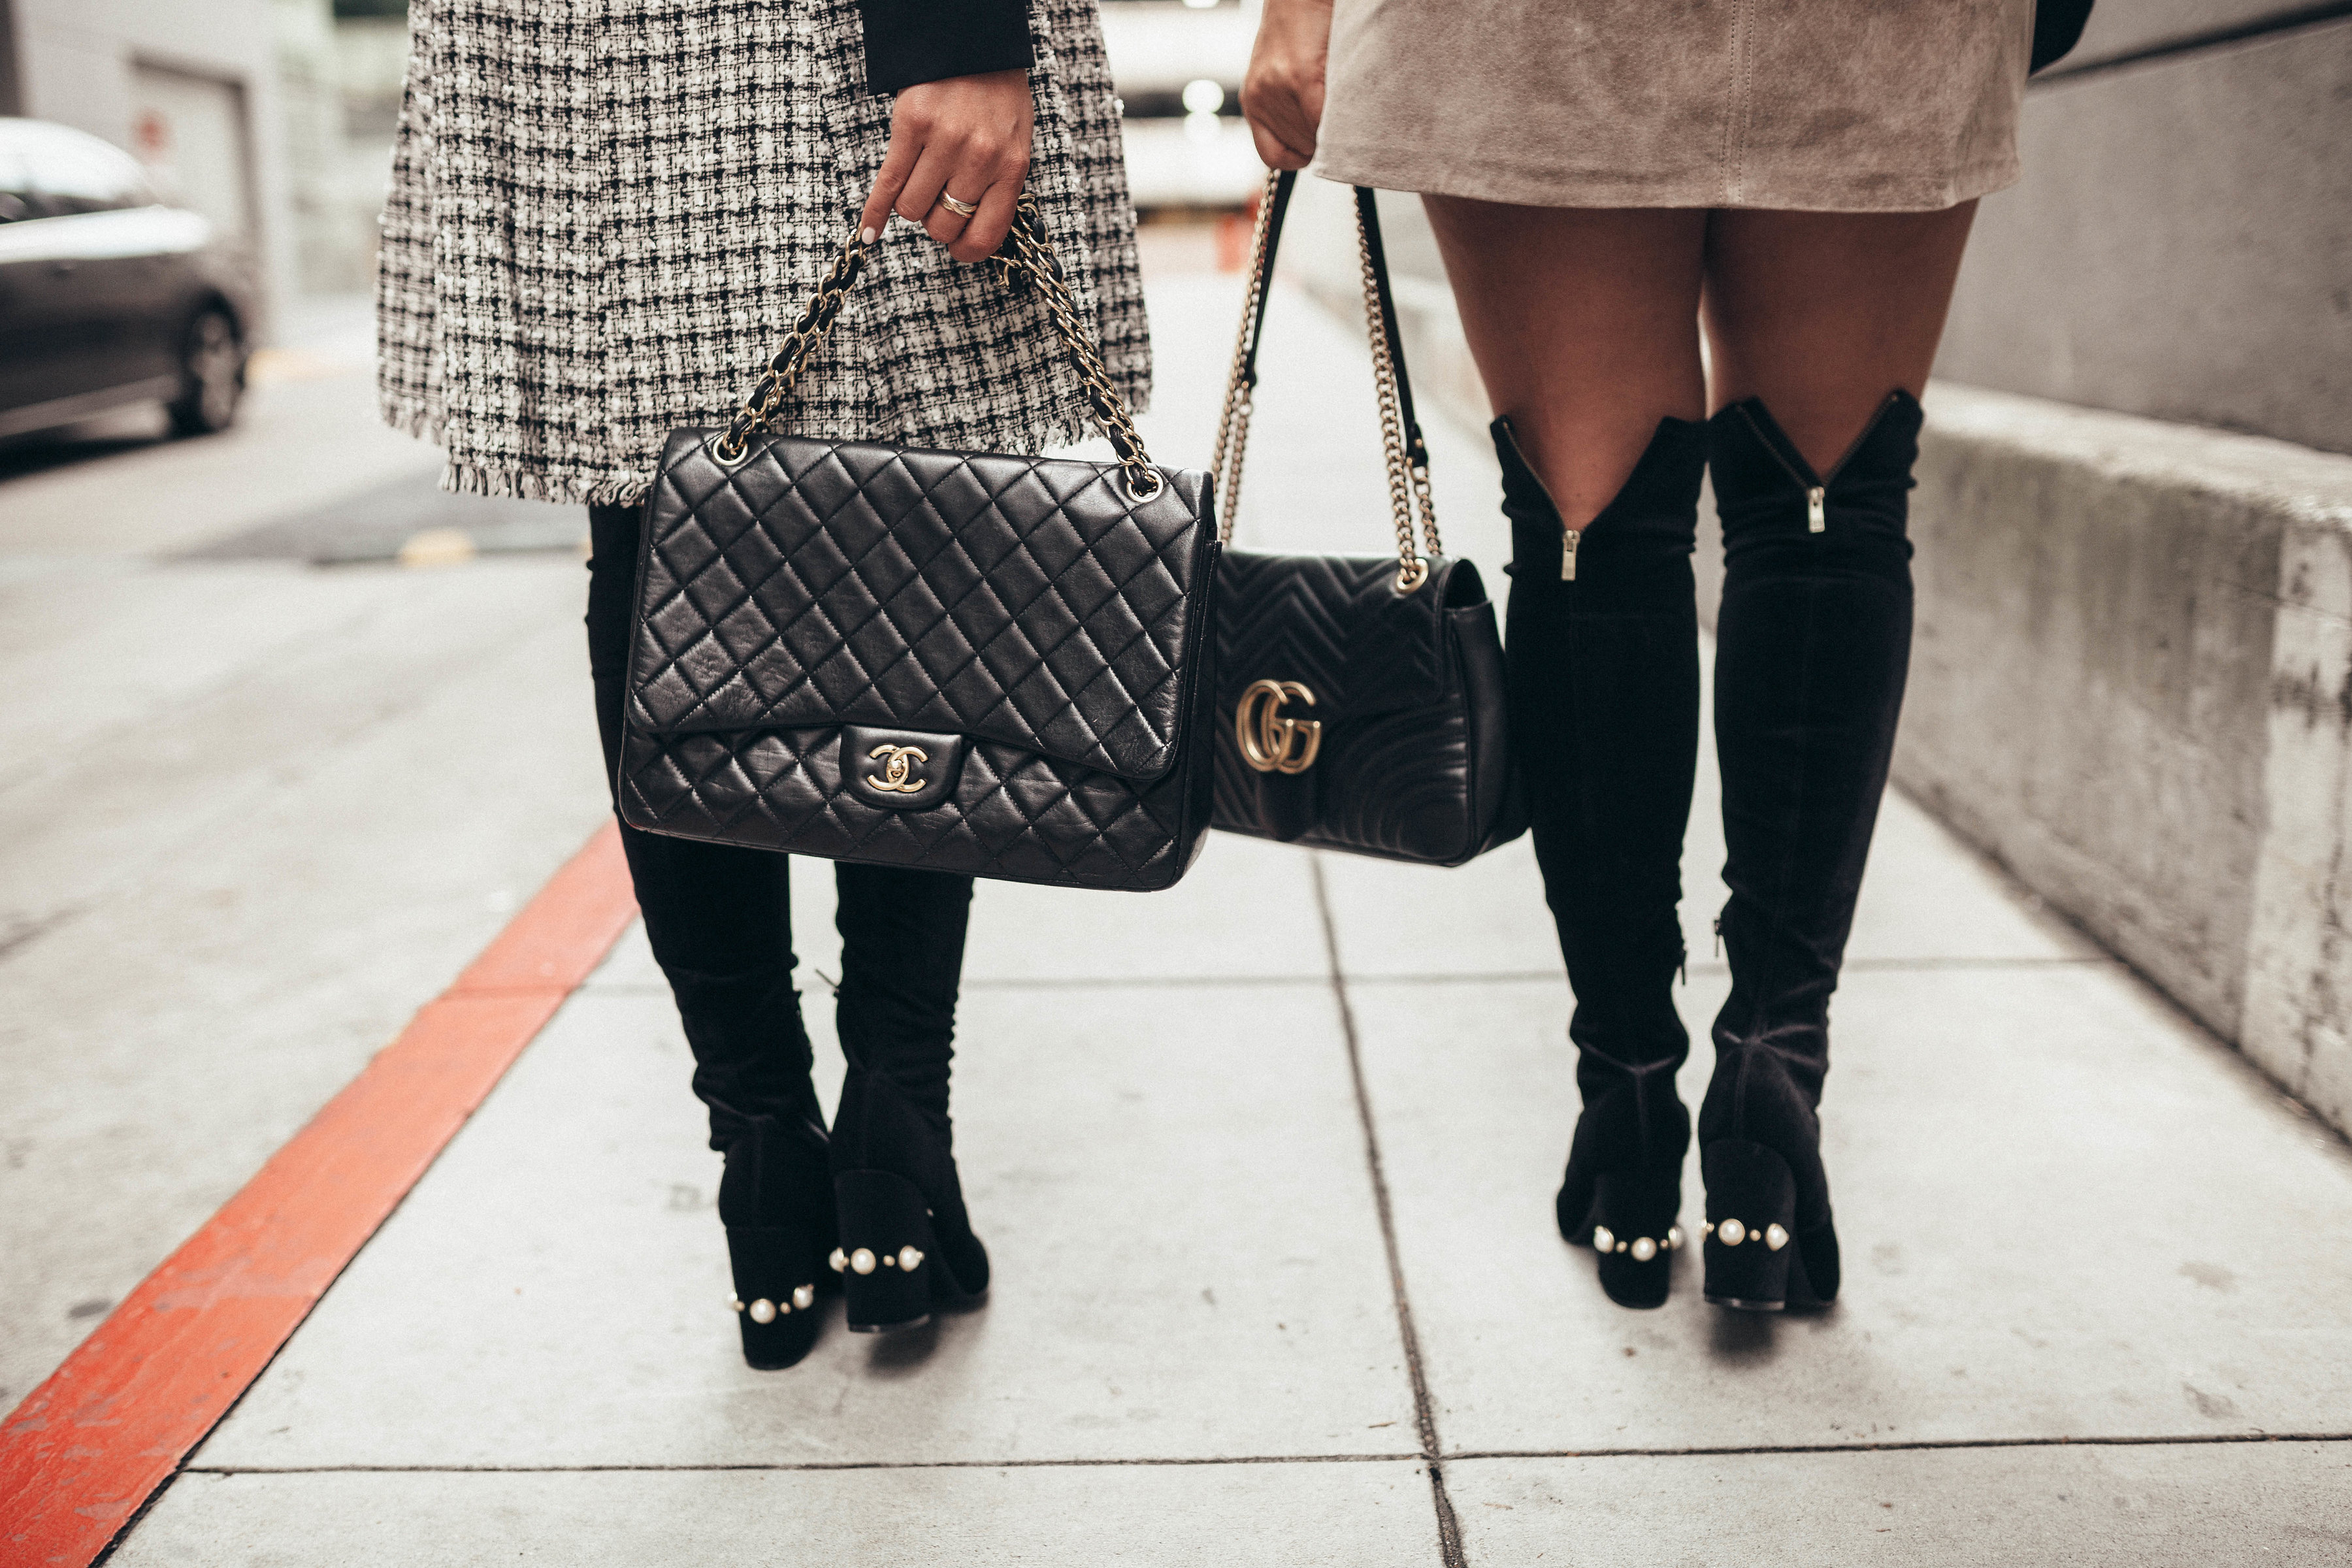 Ashley Zeal and Emily Farren from Two Peas in a Prada both share their Ivanka Trump boot. Both are wearing the Tamir over the knee boot available at Macy's.